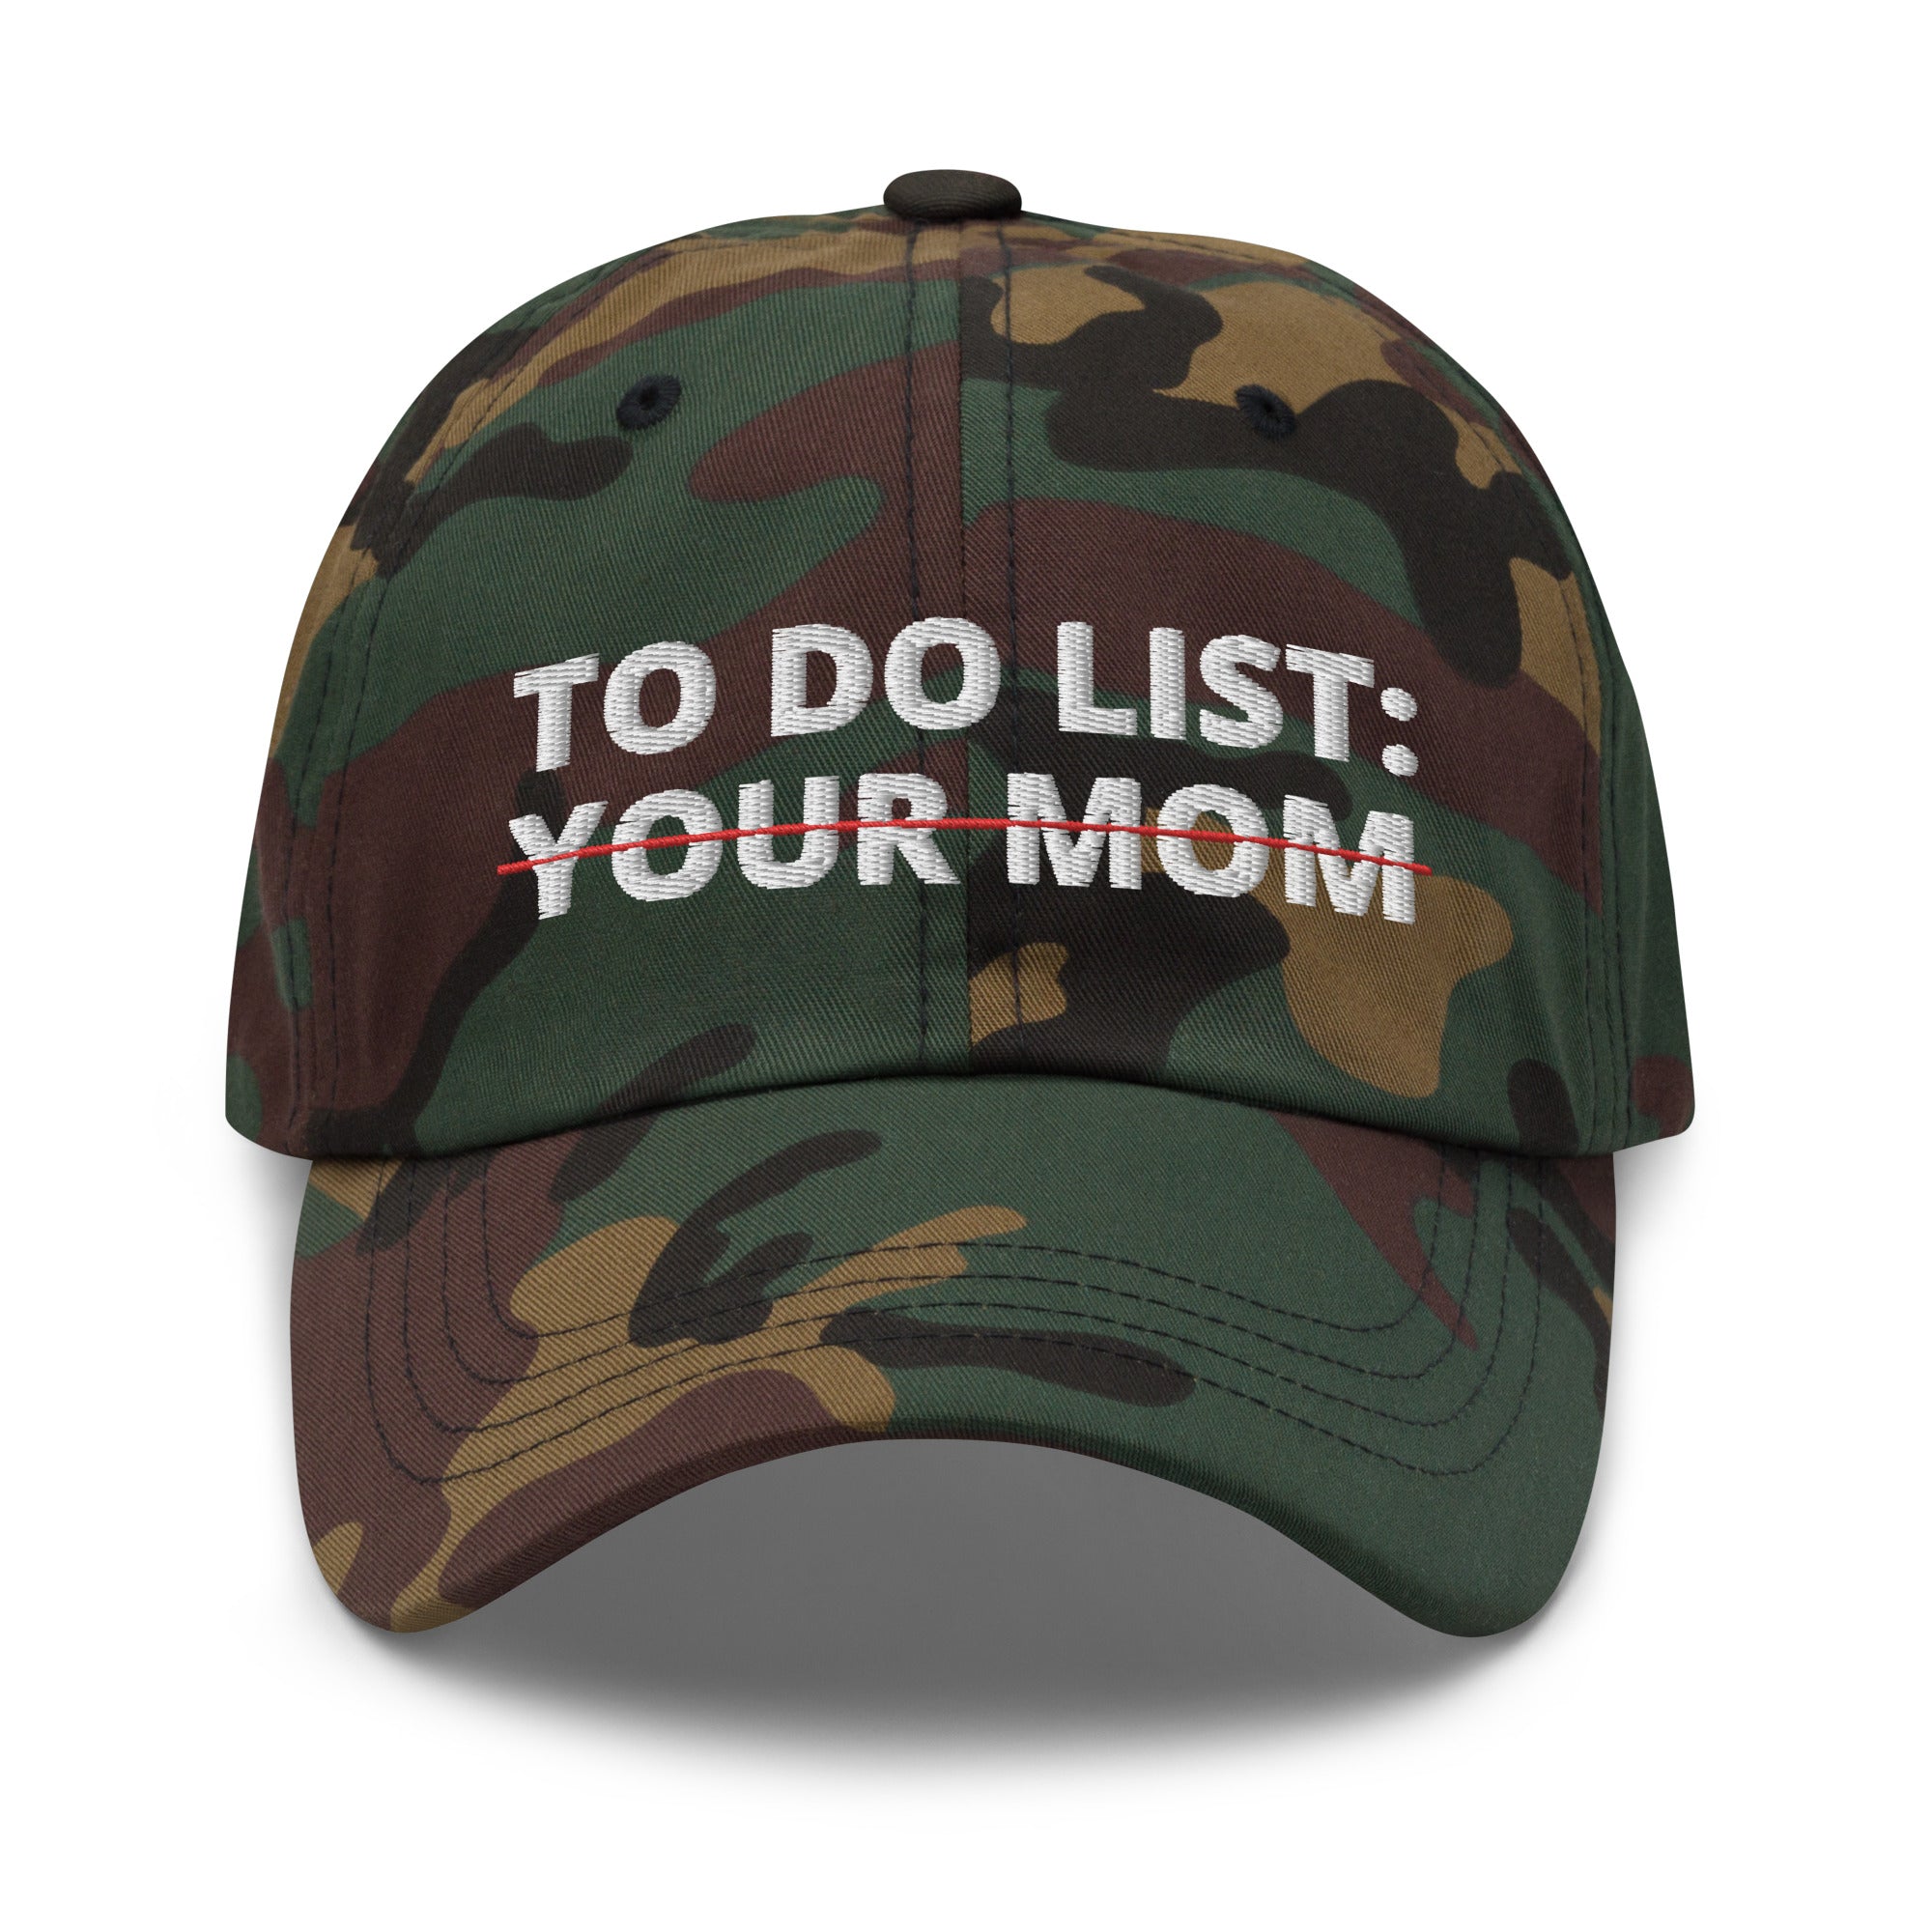 To Do List Your Mom Hat, Funny To Do List, Sarcastic To Do List, Sarcastic Gifts, Adult Humor Hat, Your Mom Cap, Funny Mom Jokes, Funny Hats - Madeinsea©